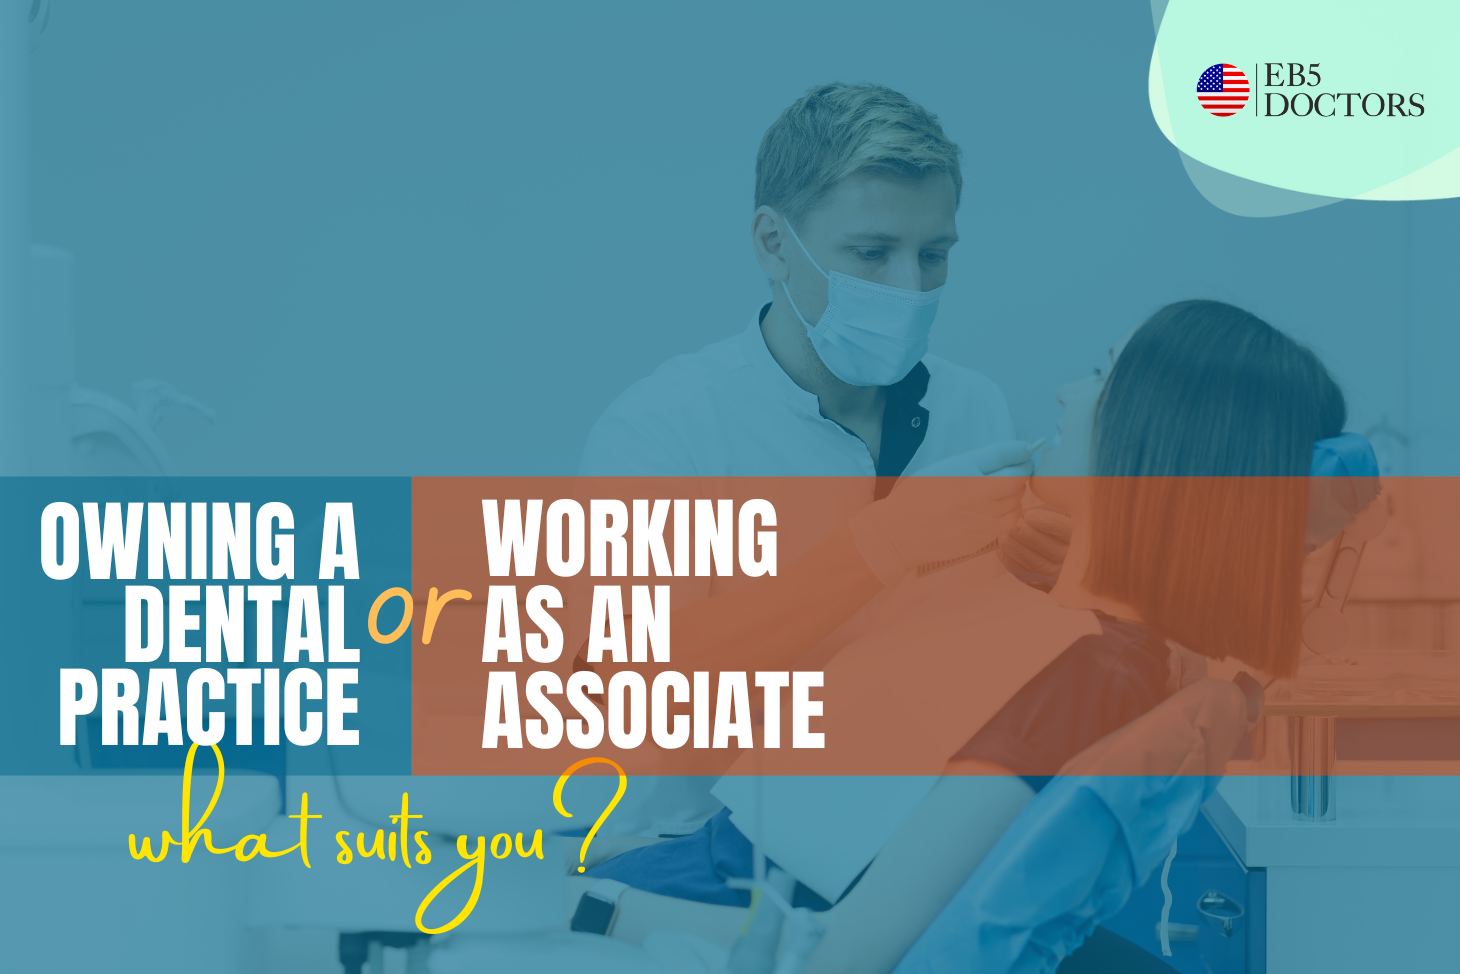 Owning a dental practice or working as an associate in USA . Best EB-5 Visa benefit